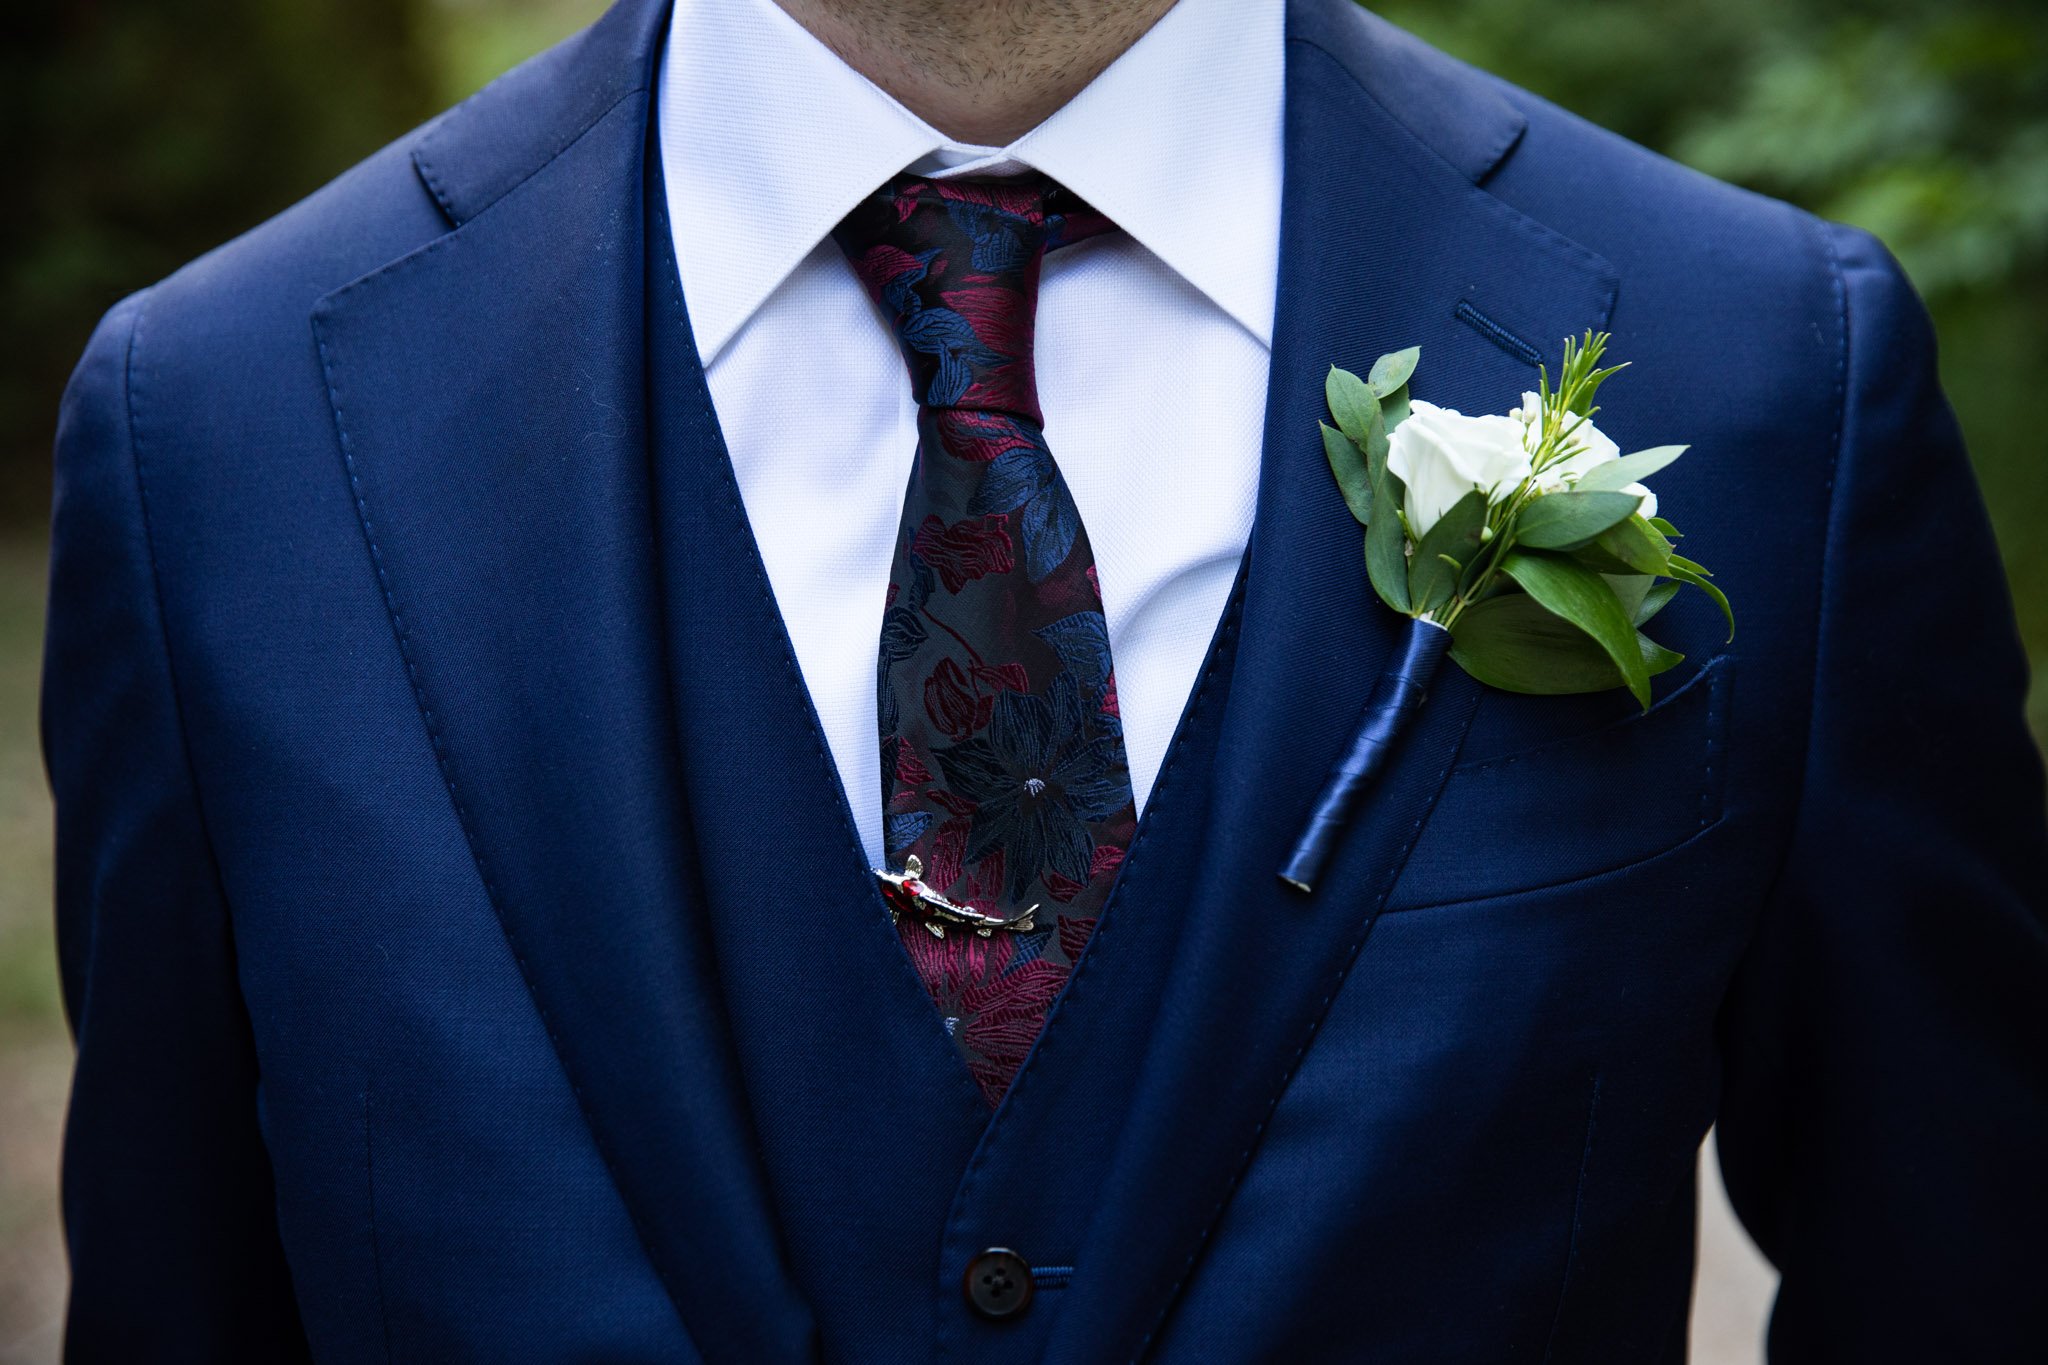 close up of grooms navy suit with vest, tie, tie clip and boutonniere.jpg